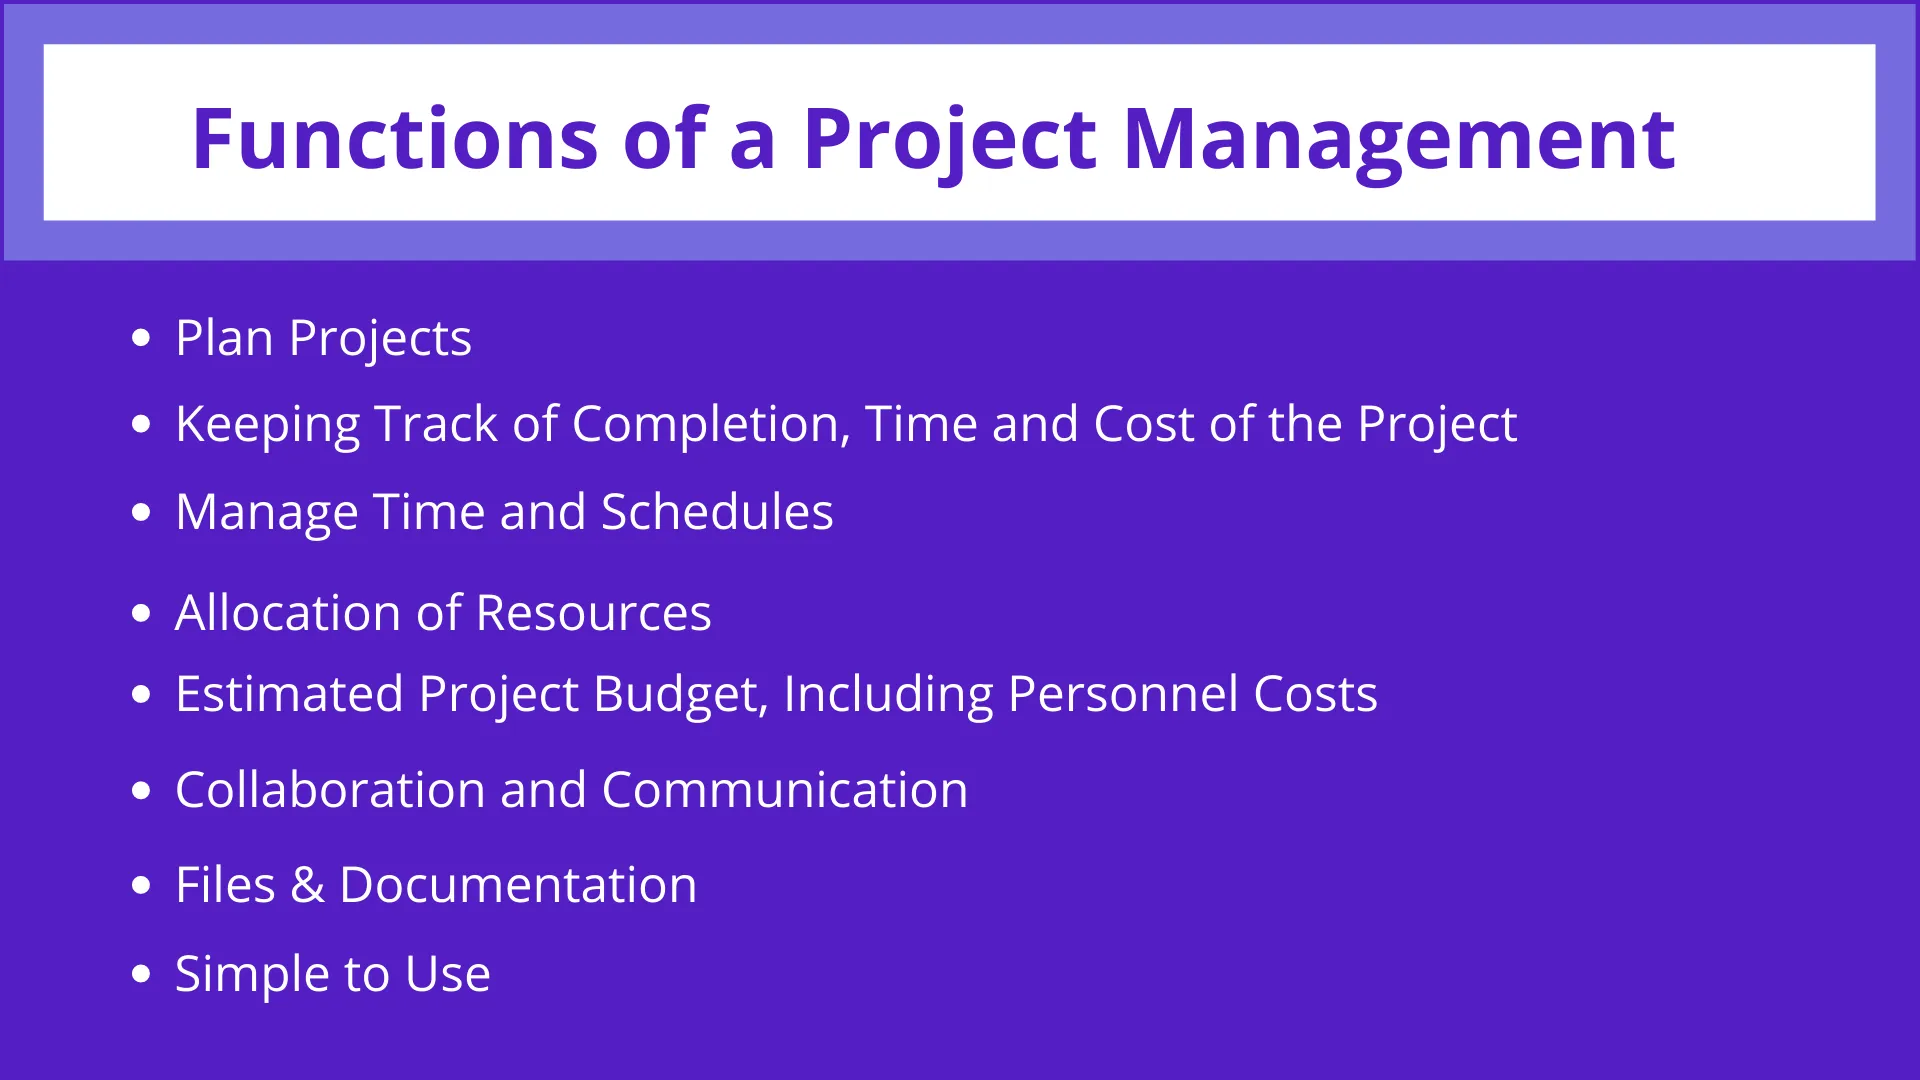 Major Advantages of Using Project Management Software